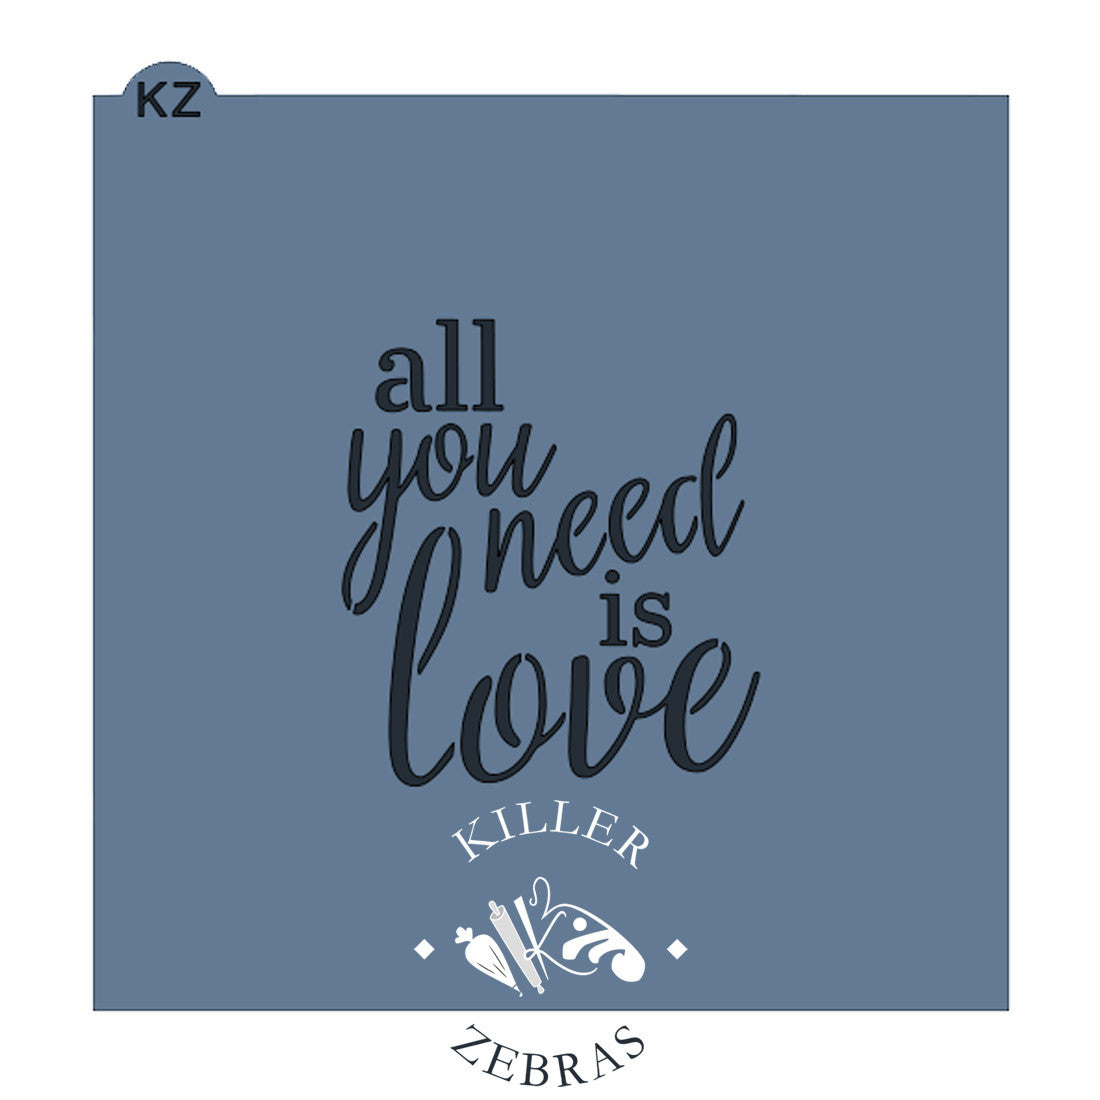 Large, square stencil saying "all you need is love".